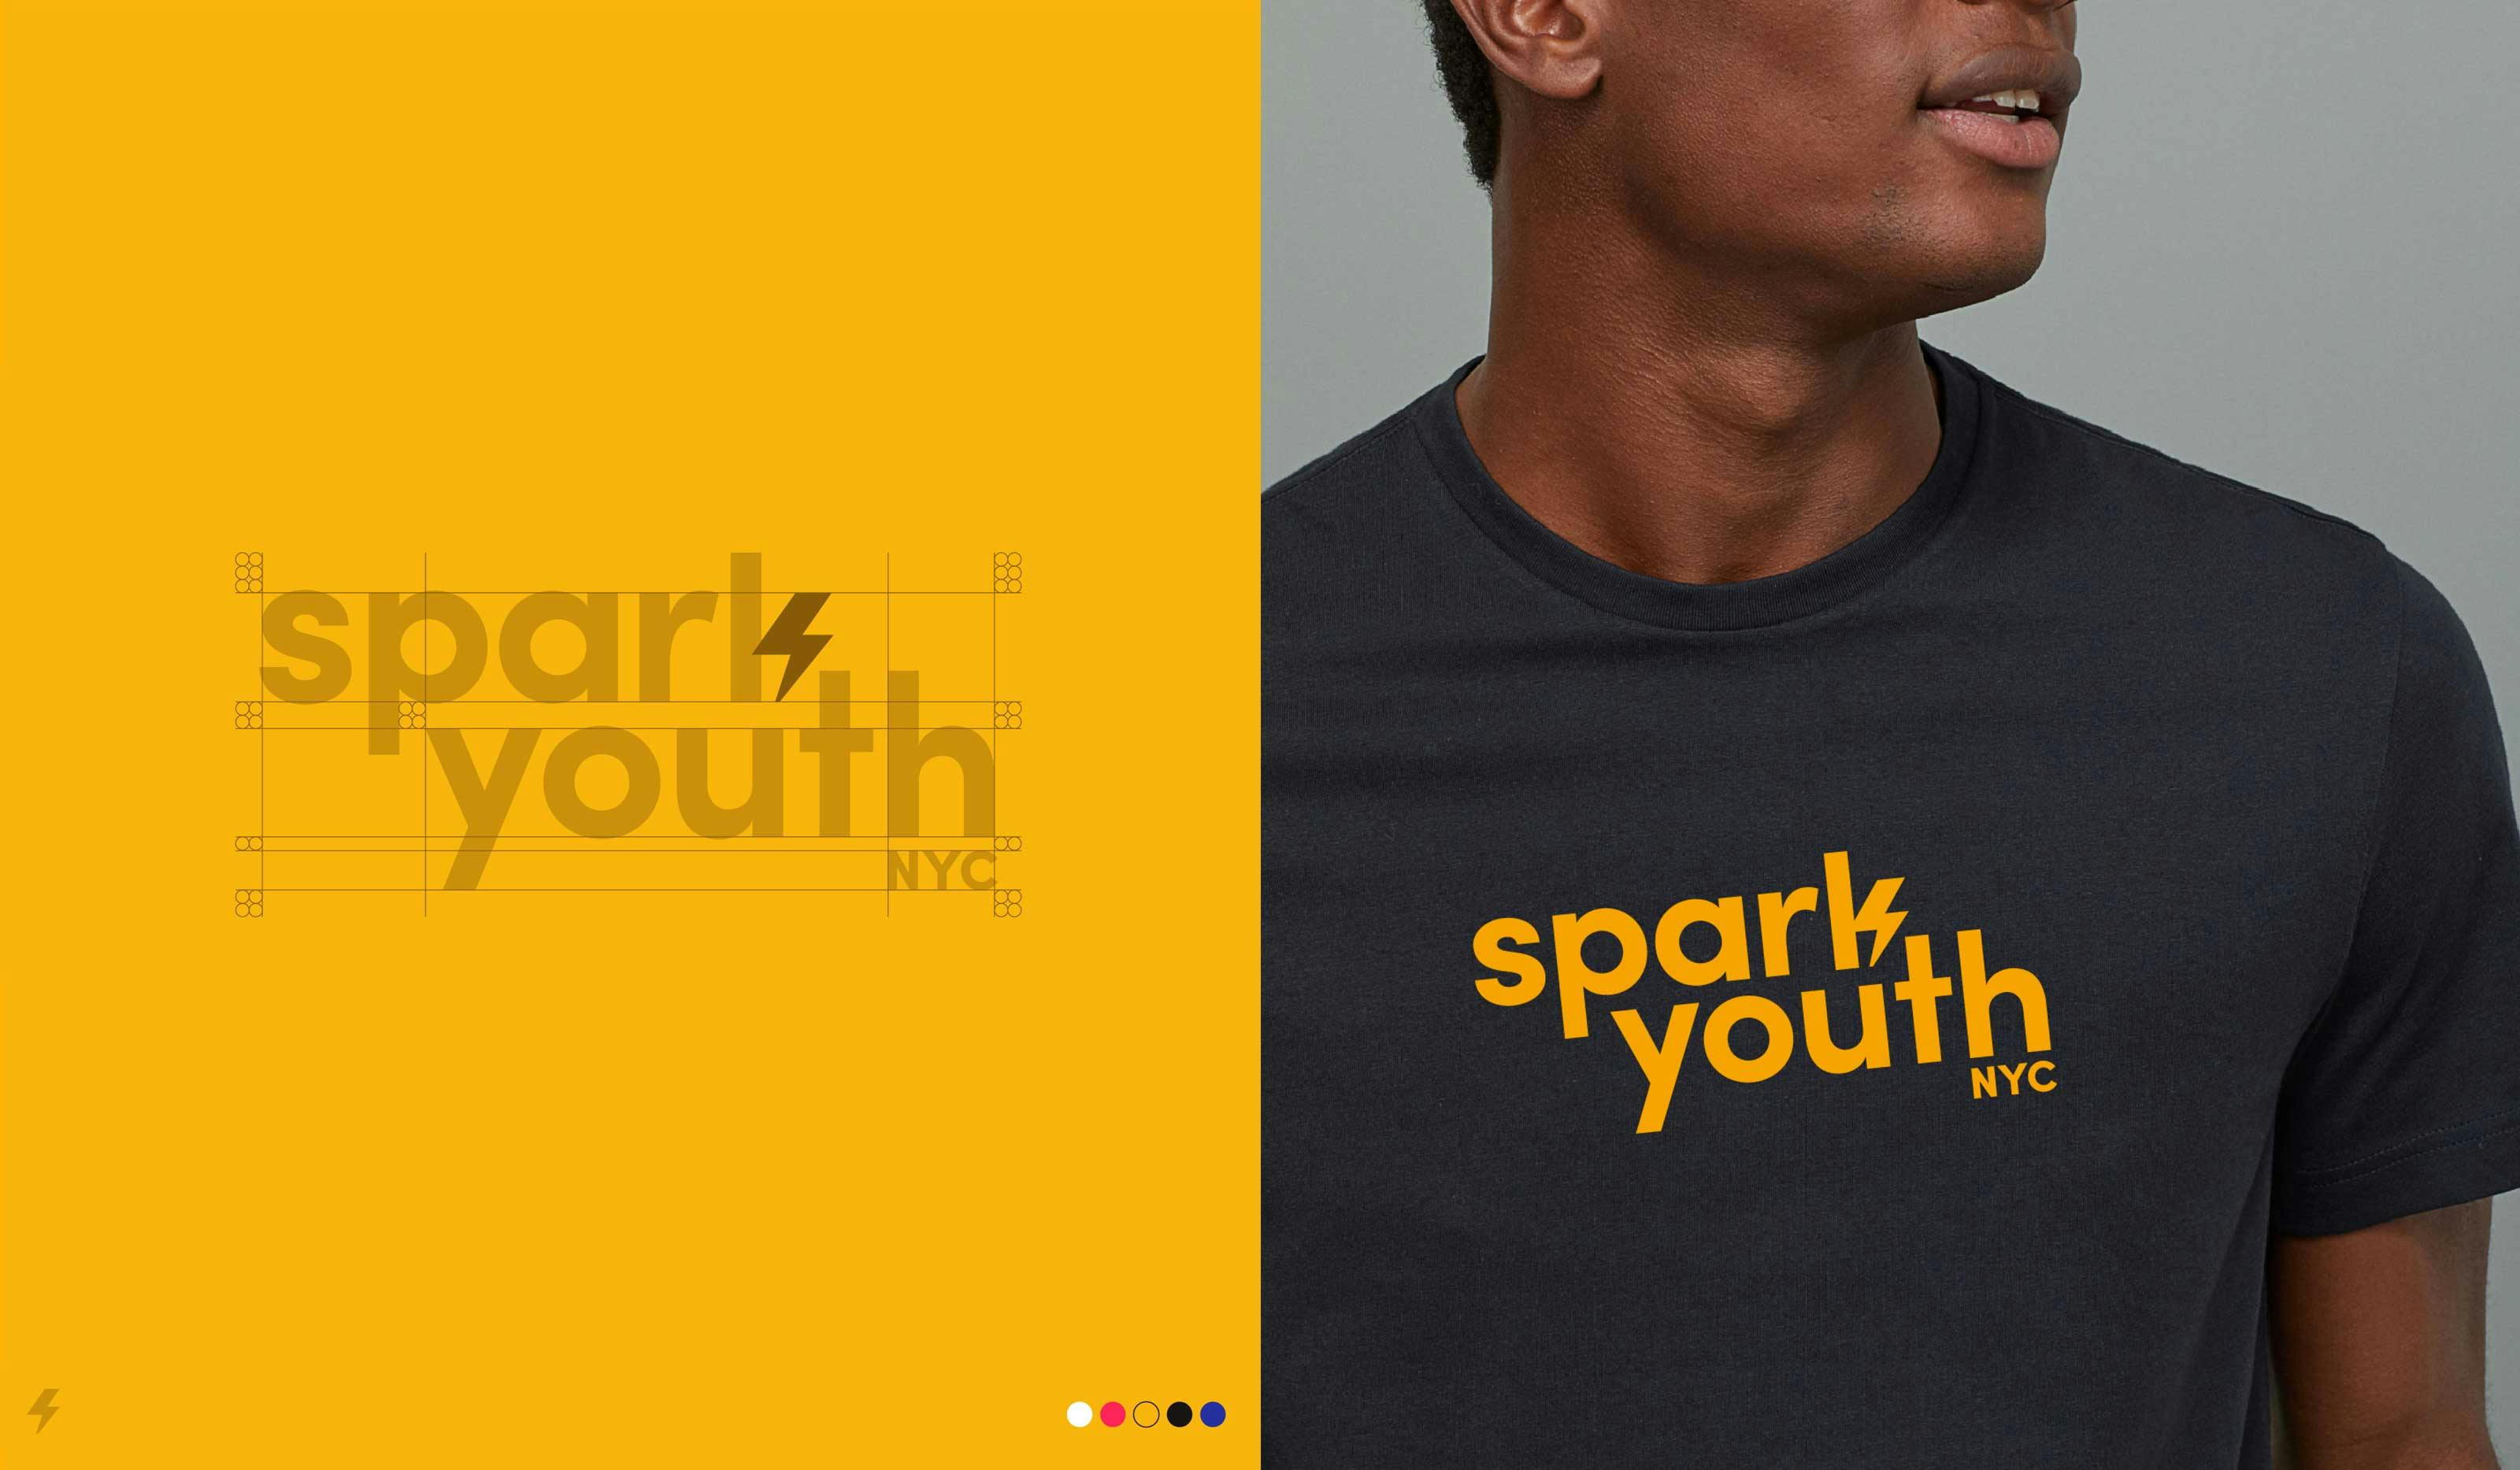 Logo-with-lightening-bolt-for-NYC-nonprofit-youth-organization.jpg